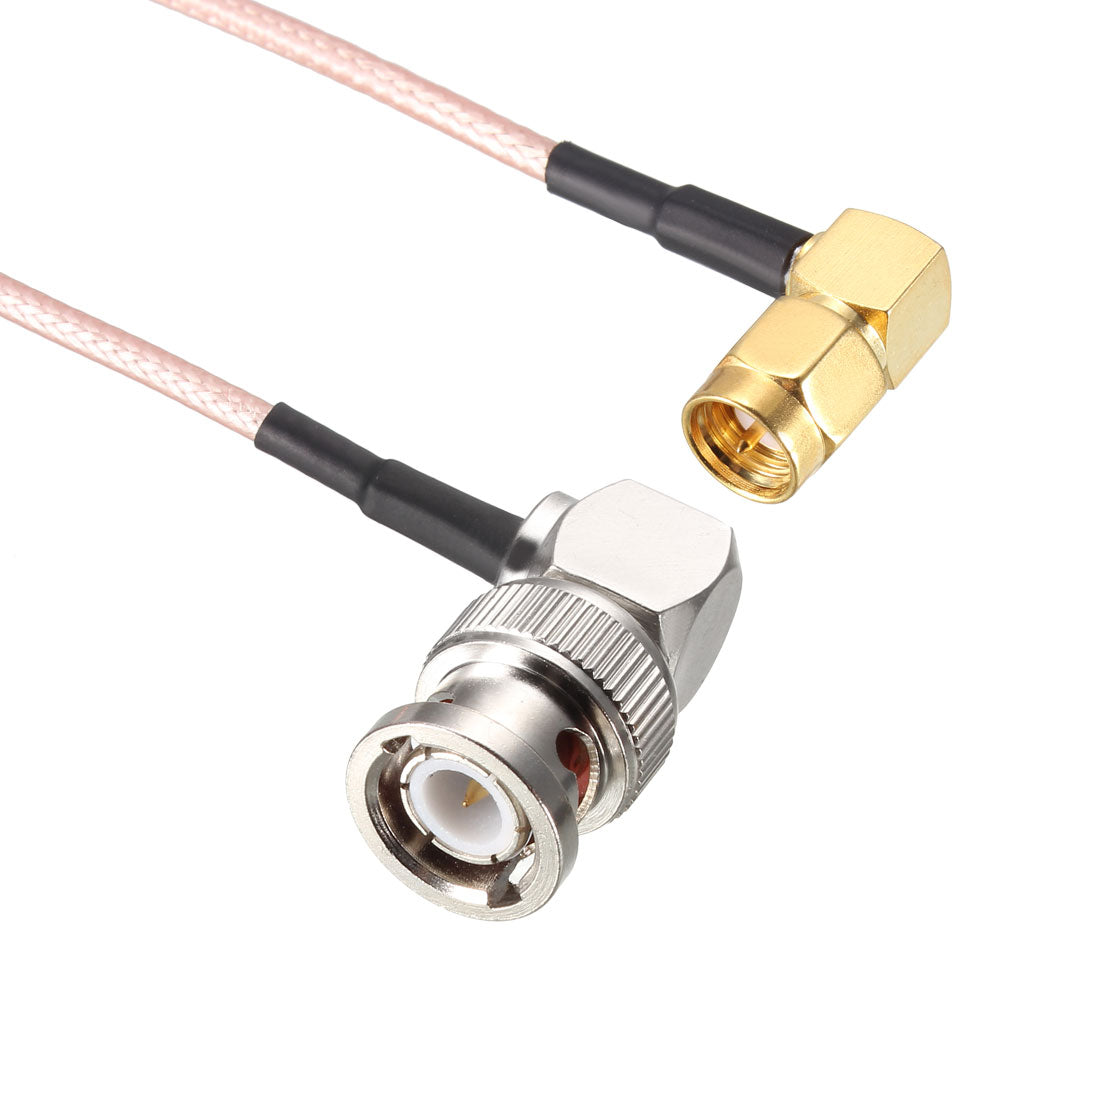 uxcell Uxcell BNC Male Right Angle to SMA Male Right Angle RG316 Coaxial Cable